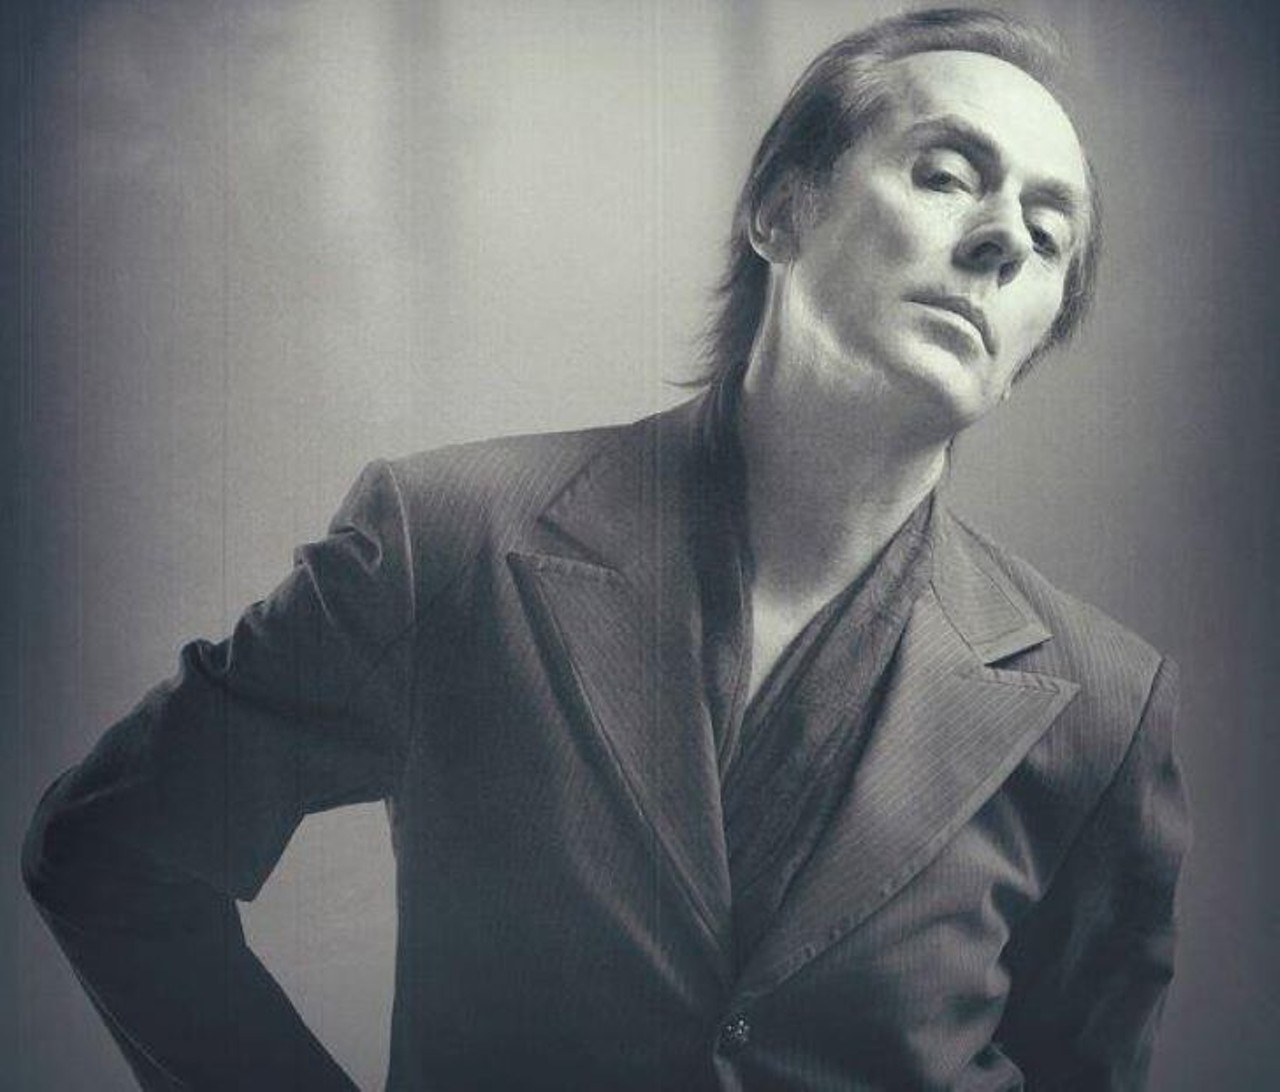 Thursday, Feb. 7Peter Murphy at the Plaza Live